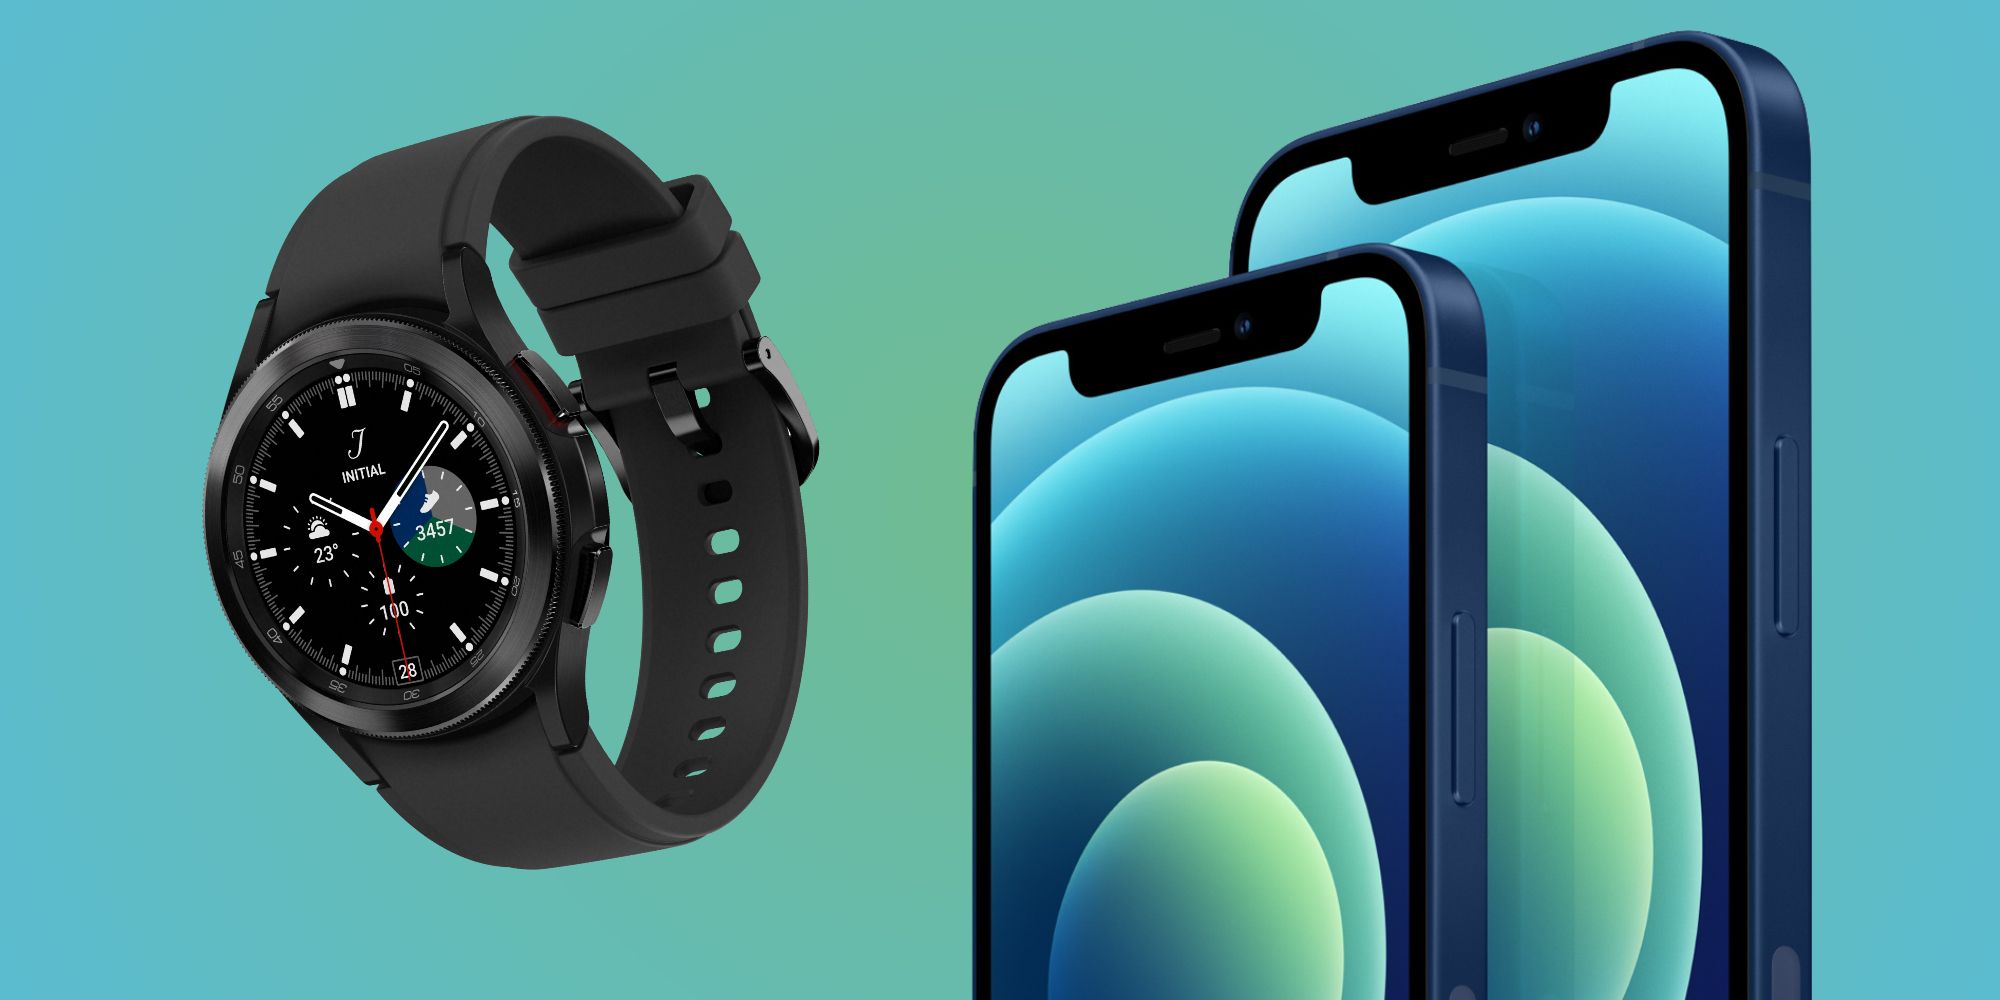 Samsung Galaxy Watch 4 and iPhone 12